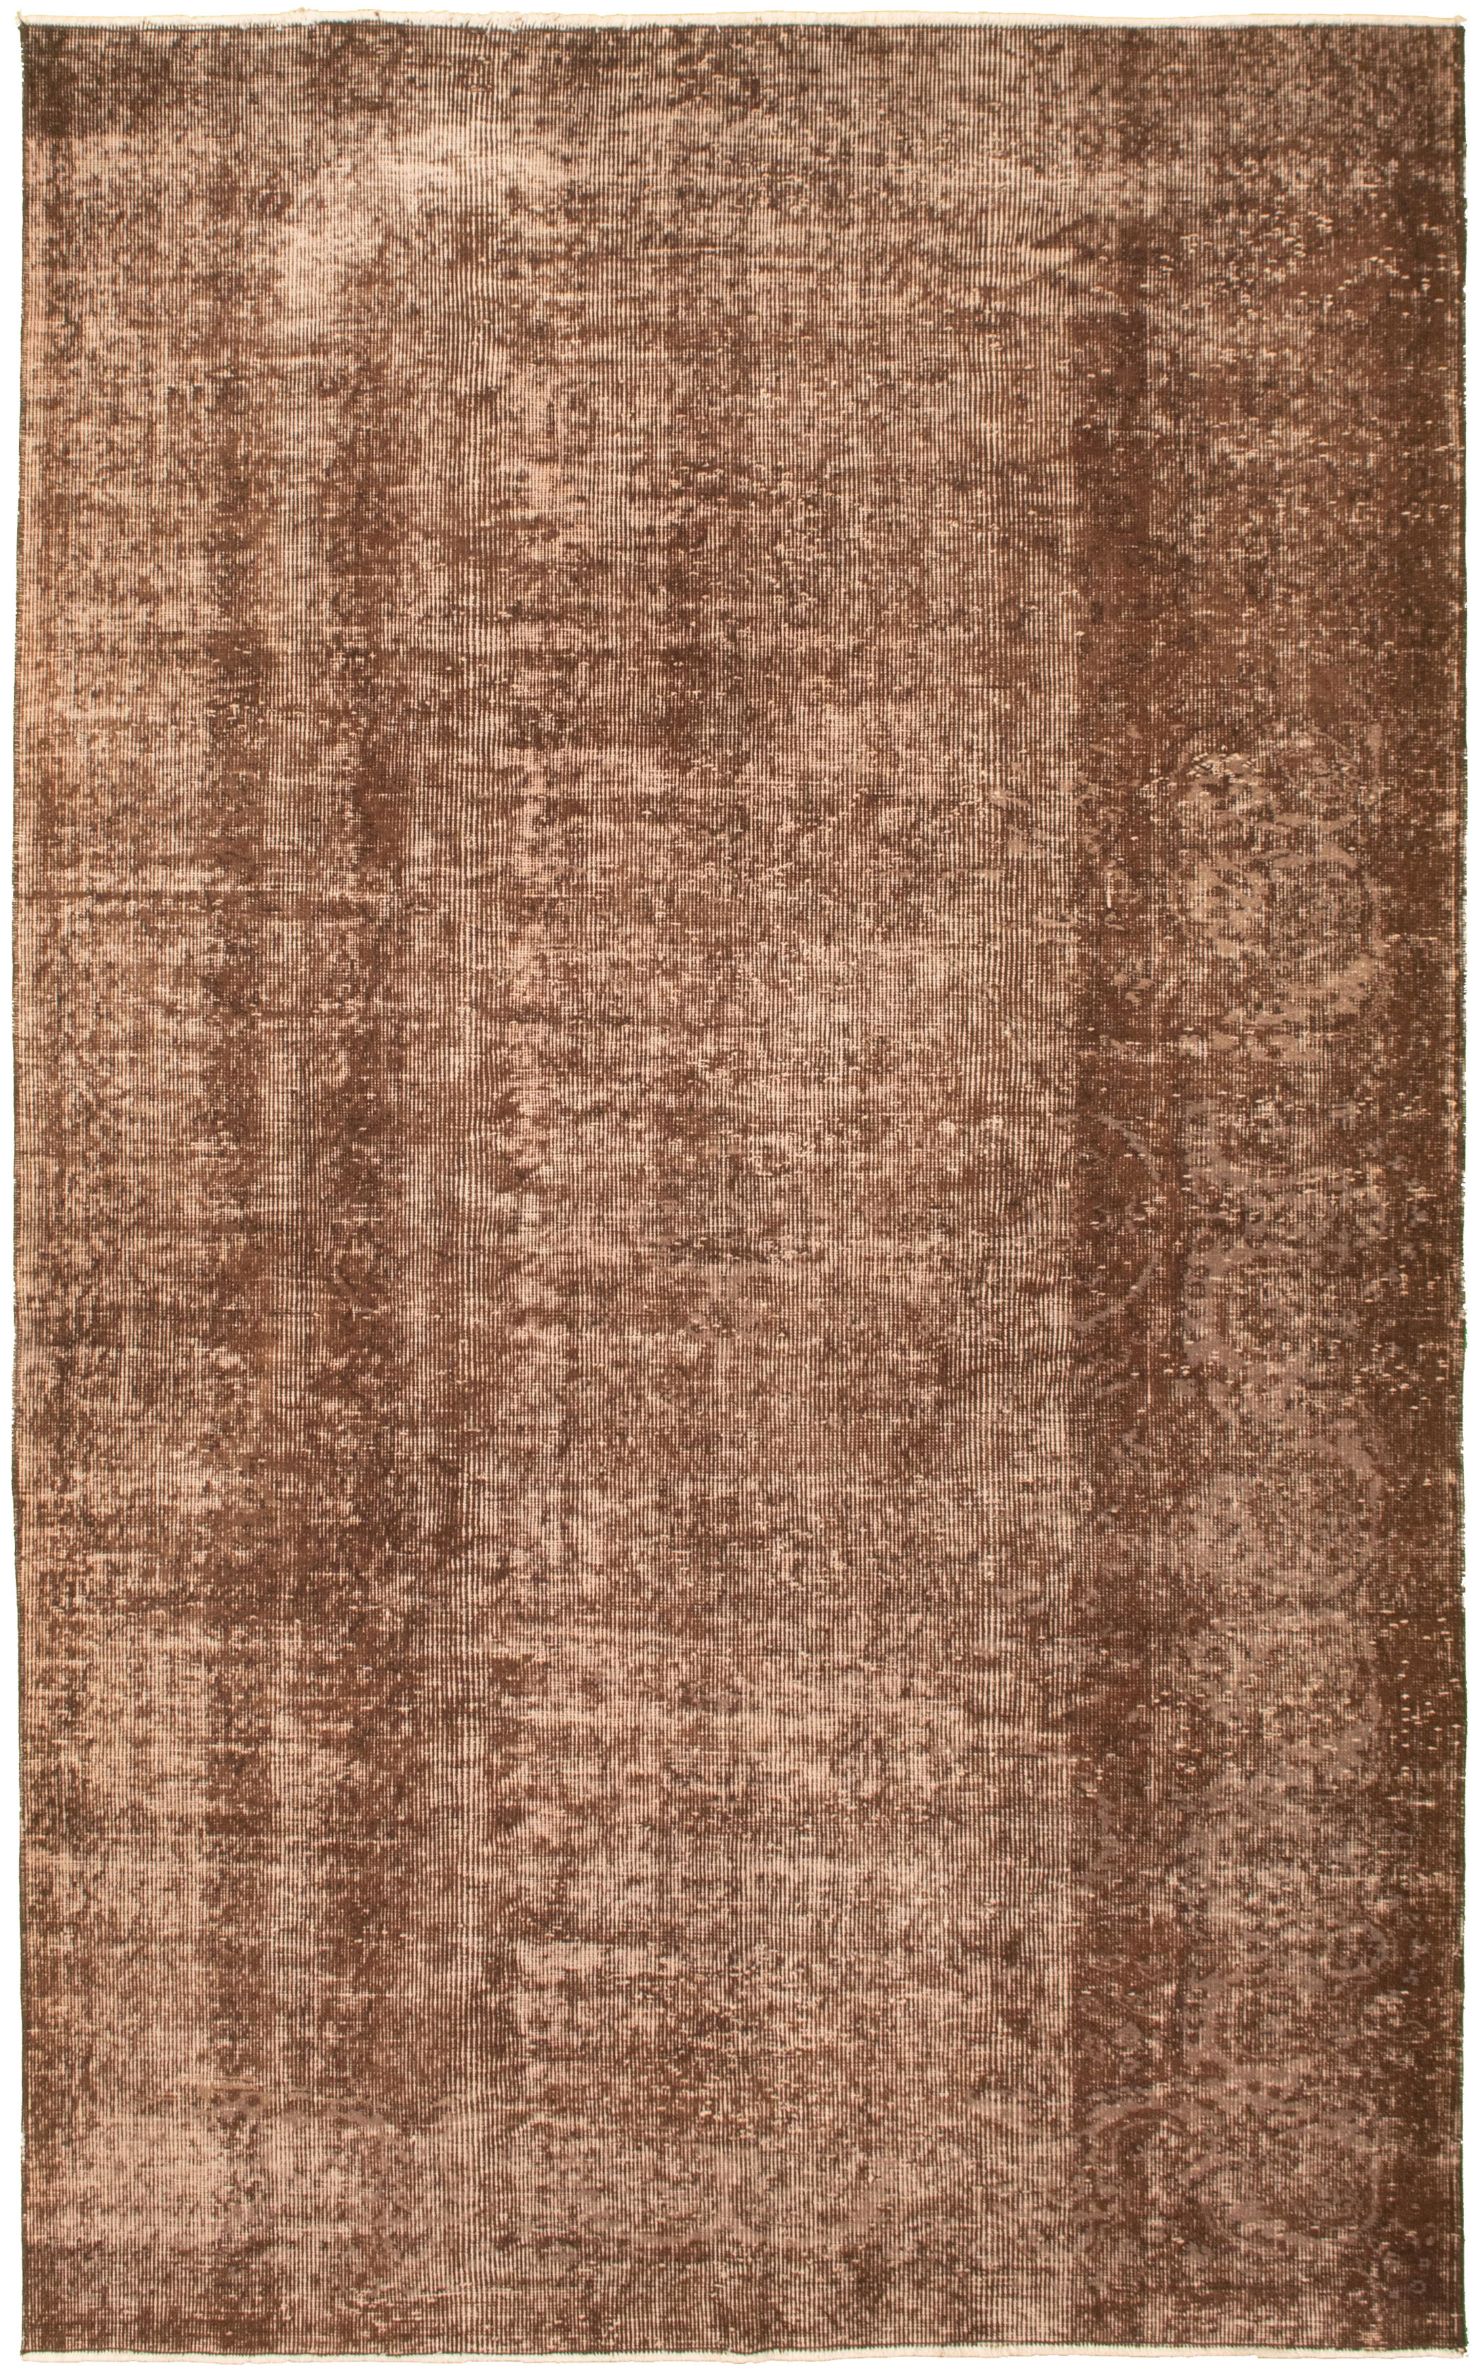 Hand-knotted Color Transition Dark Brown Wool Rug 5'11" x 8'9" Size: 5'11" x 8'9"  